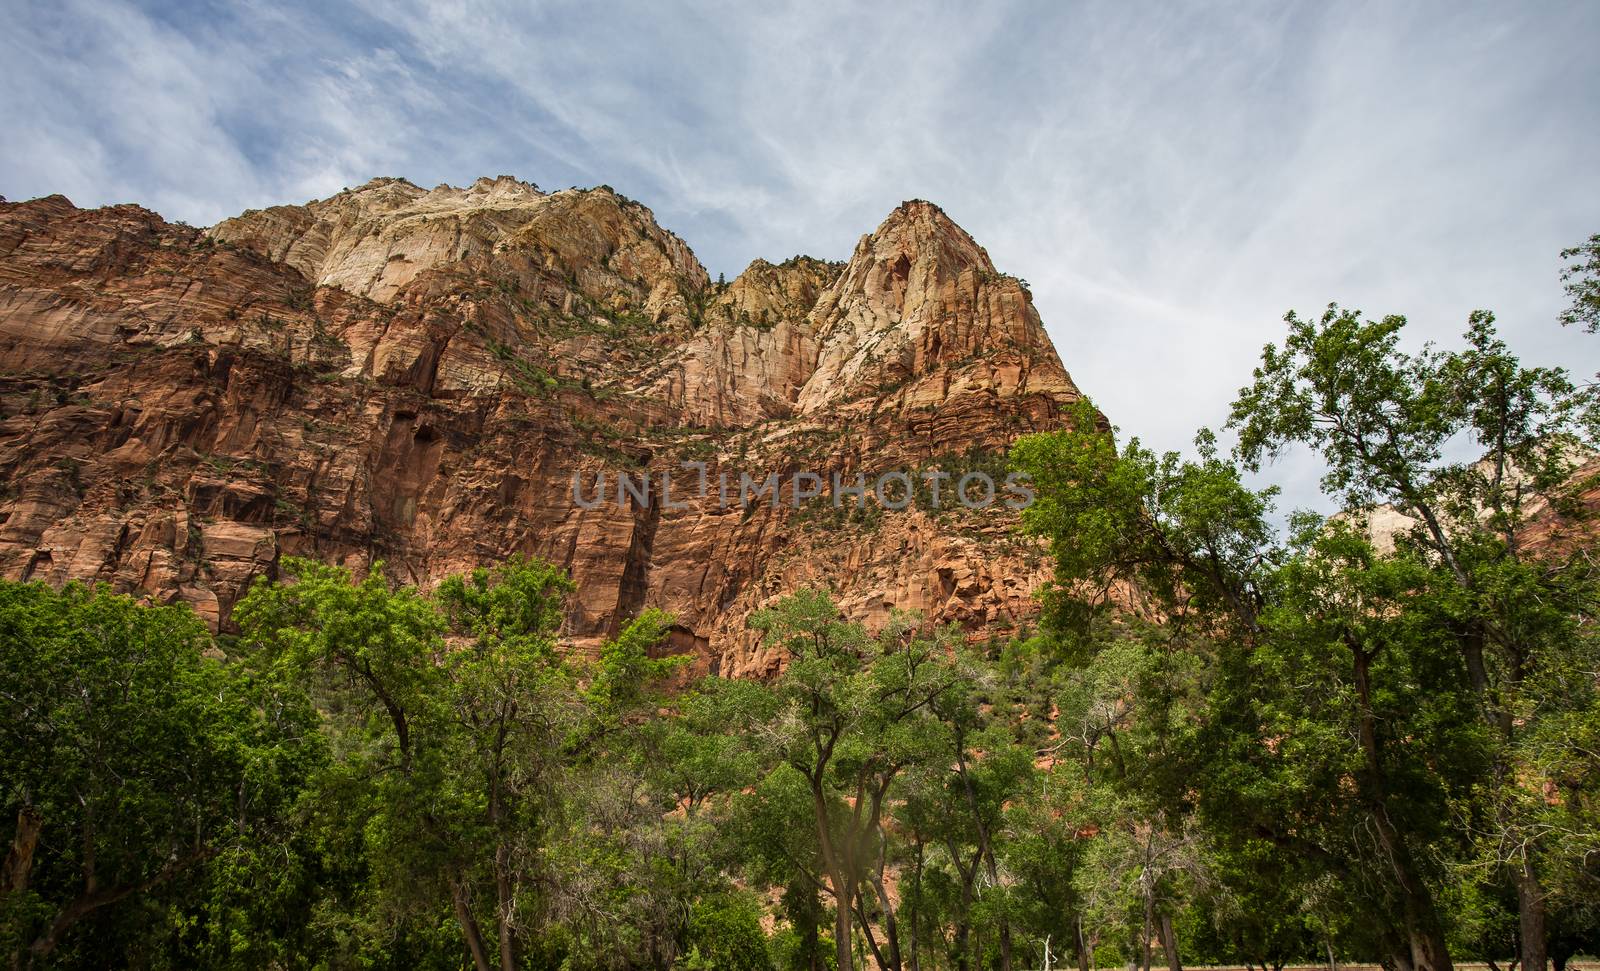 Zion National Park, Utah. A land filled with steep cliffs and forests.